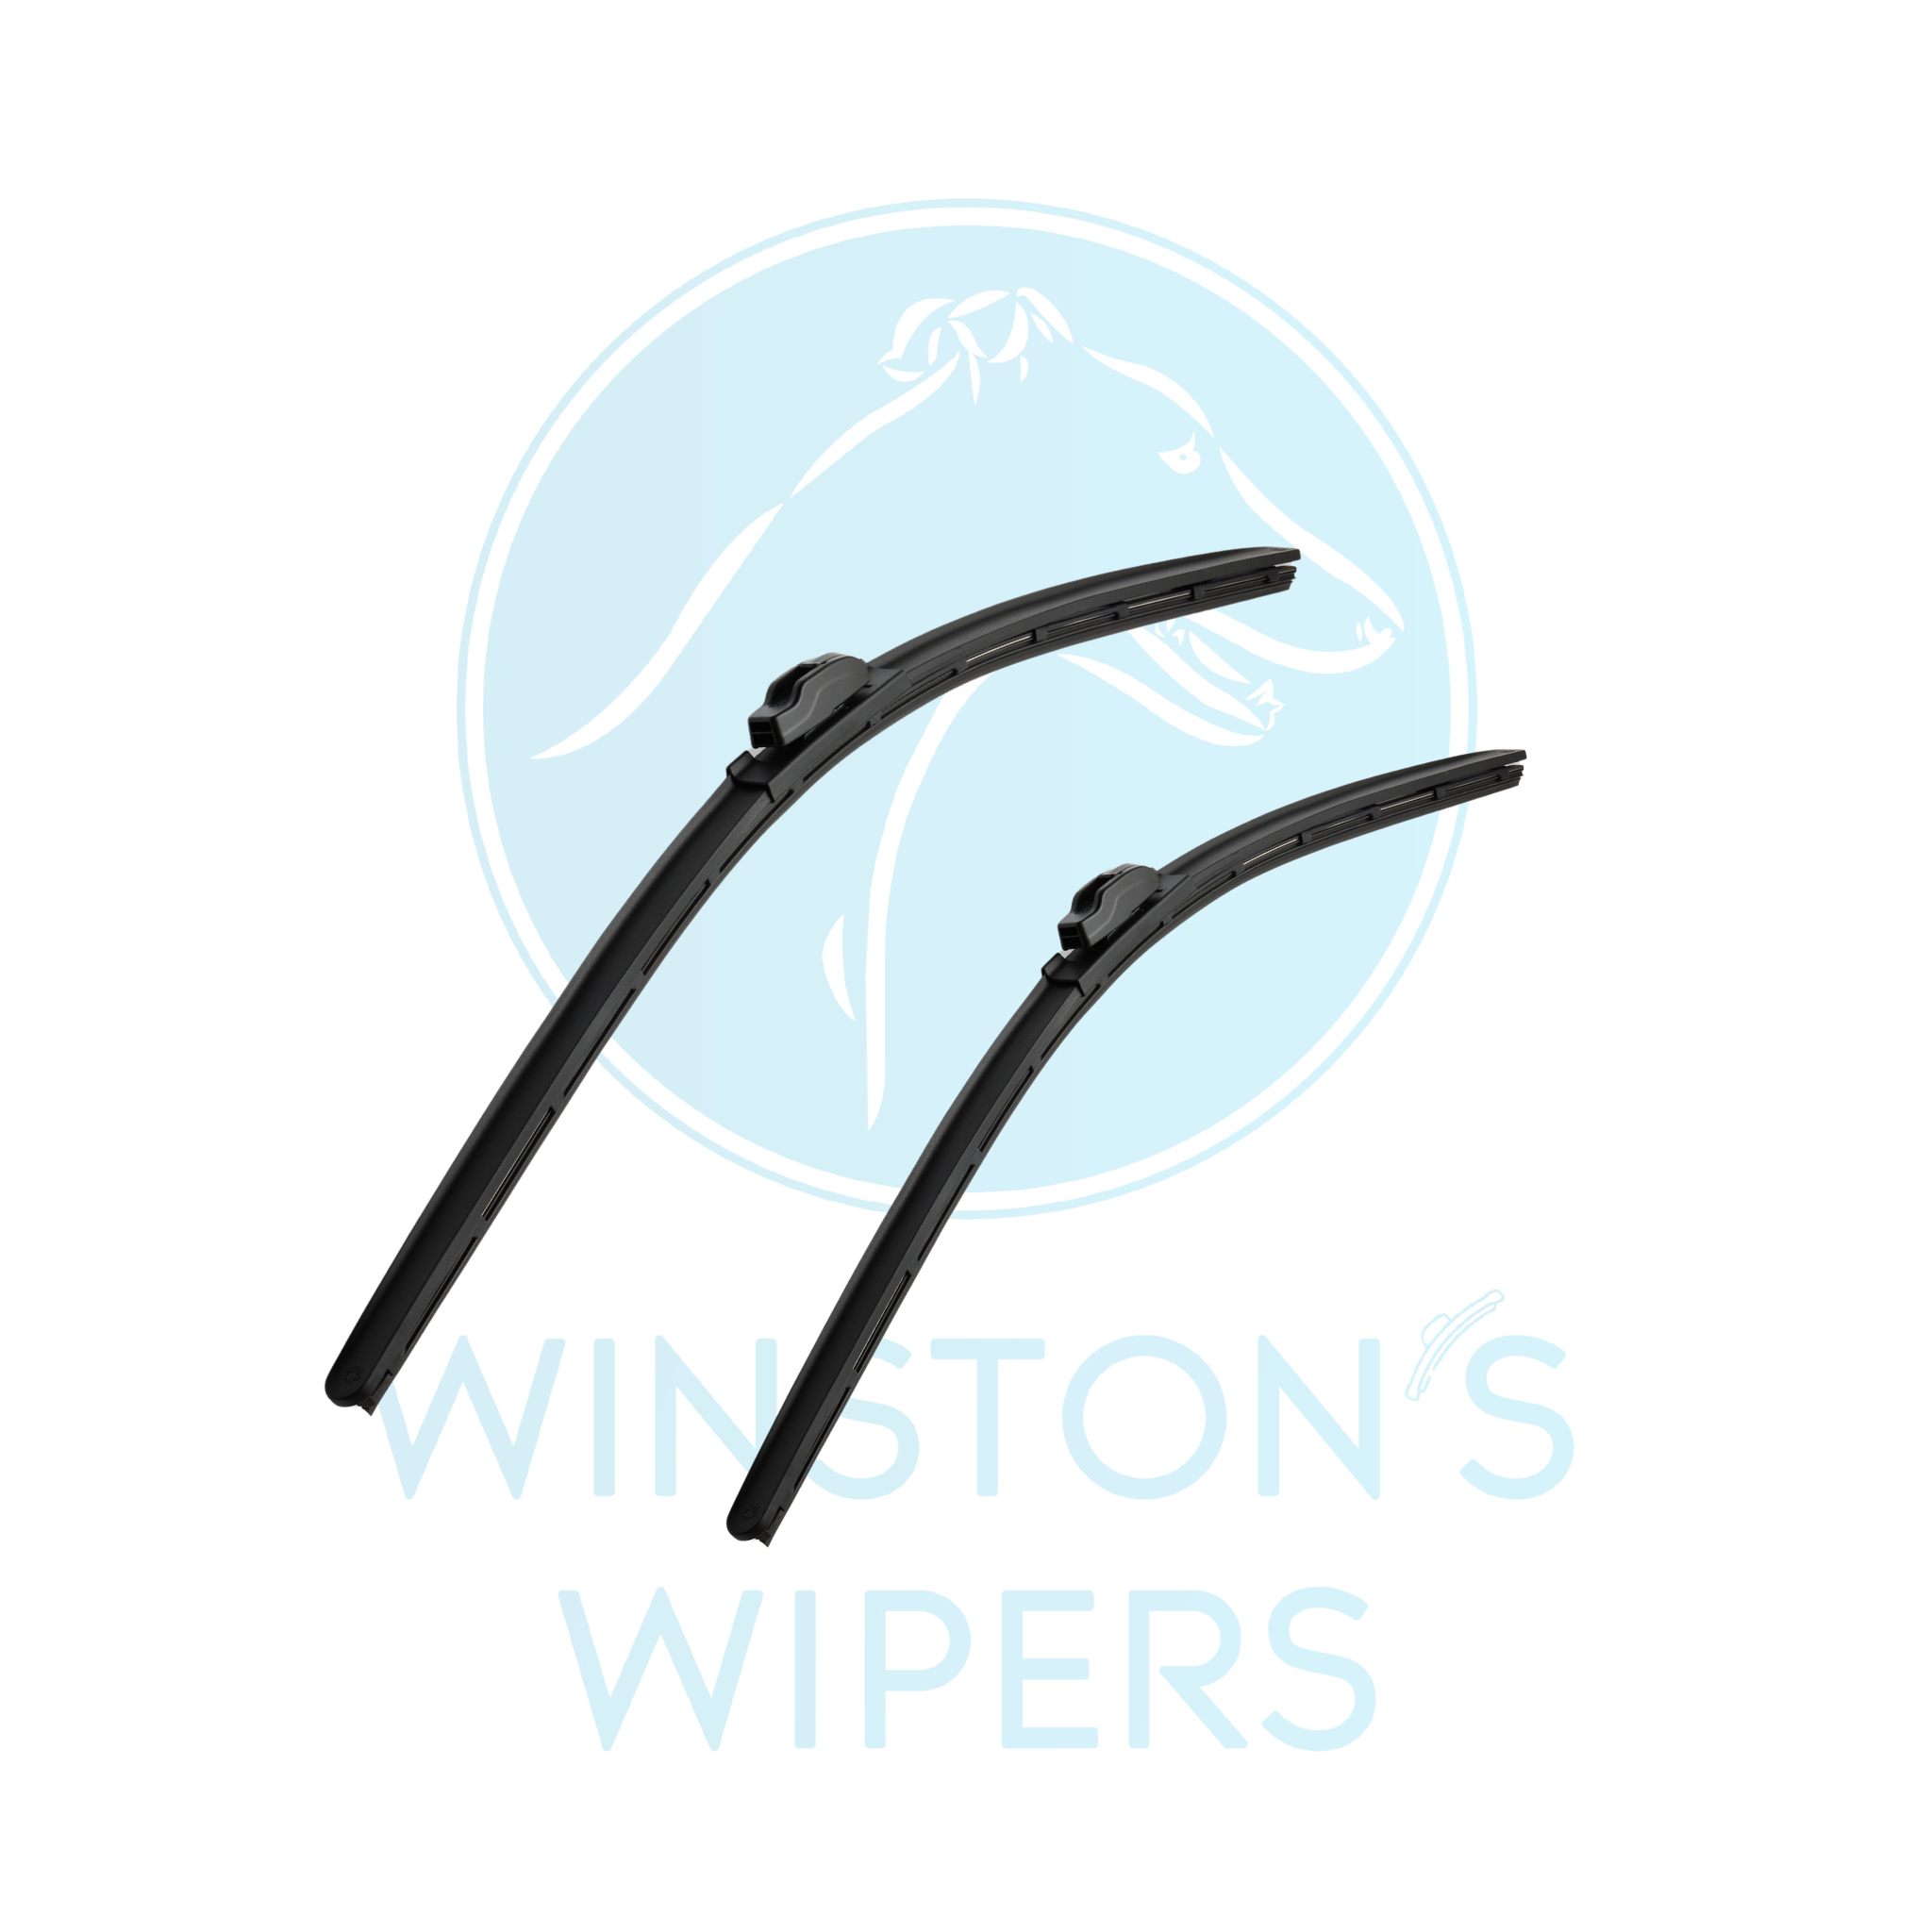 Winston's Aeroblade Wipers To Suit Toyota Hilux 2005-2015